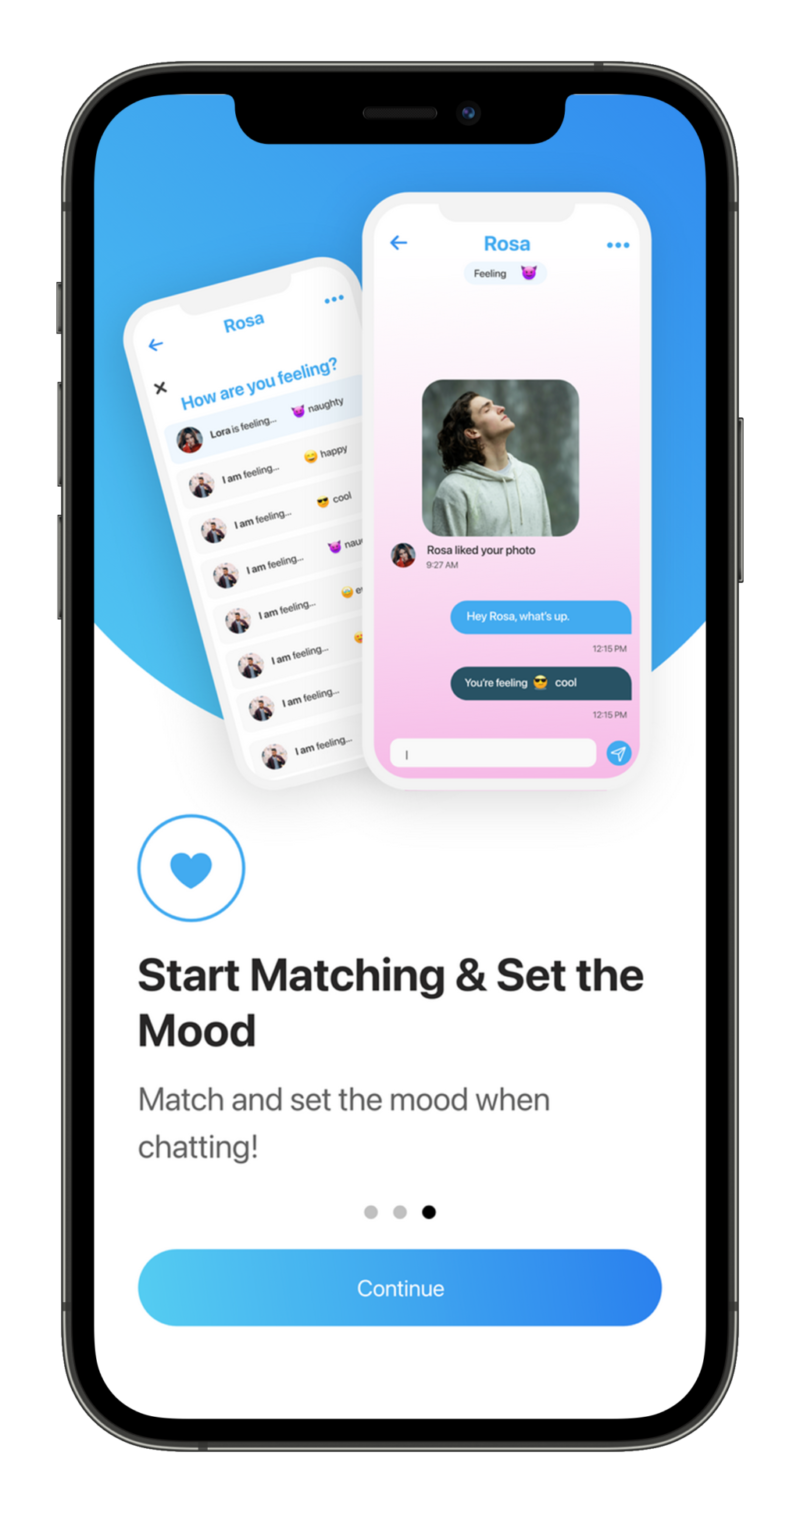 Dating app ‘Wingr’ aims to take the search for a soulmate beyond surface-level